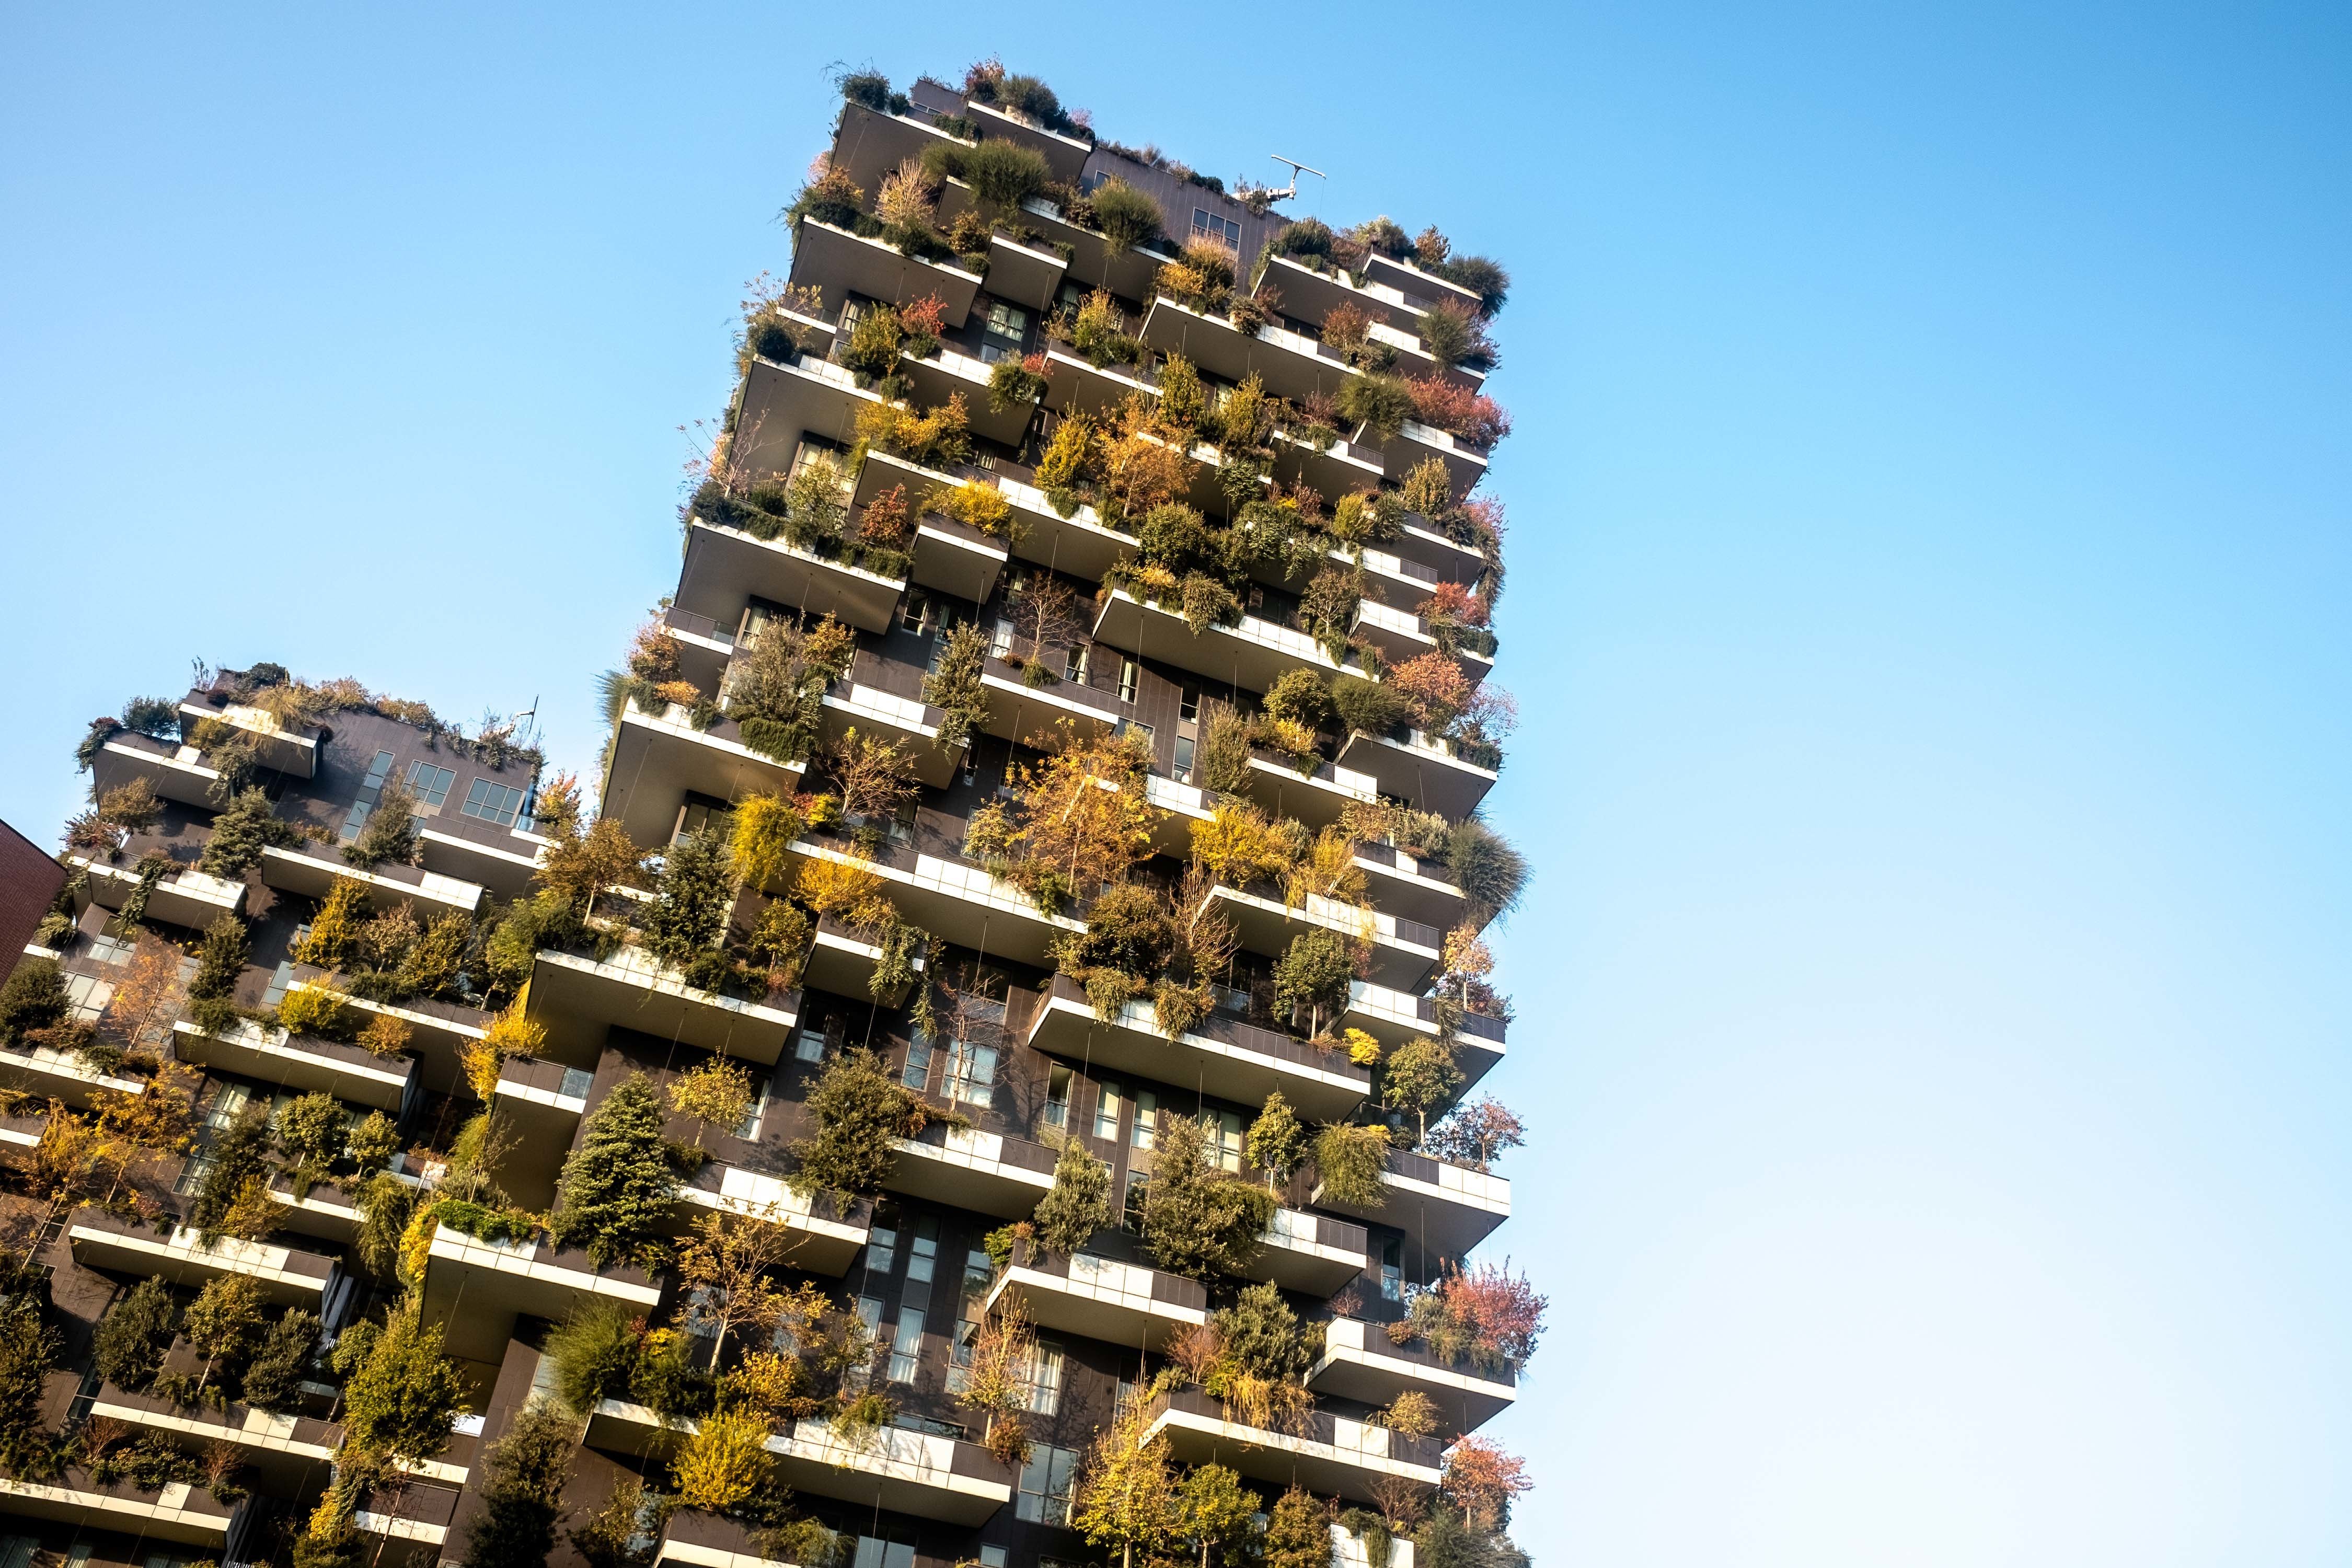 The Bosco Verticale buildings in autumn in Porta Nuova complex. The complex is an 11-story office building. Its height is 111 meters and 76 meters that will gather more than 900 trees of 96,000 sq ft. terraces.